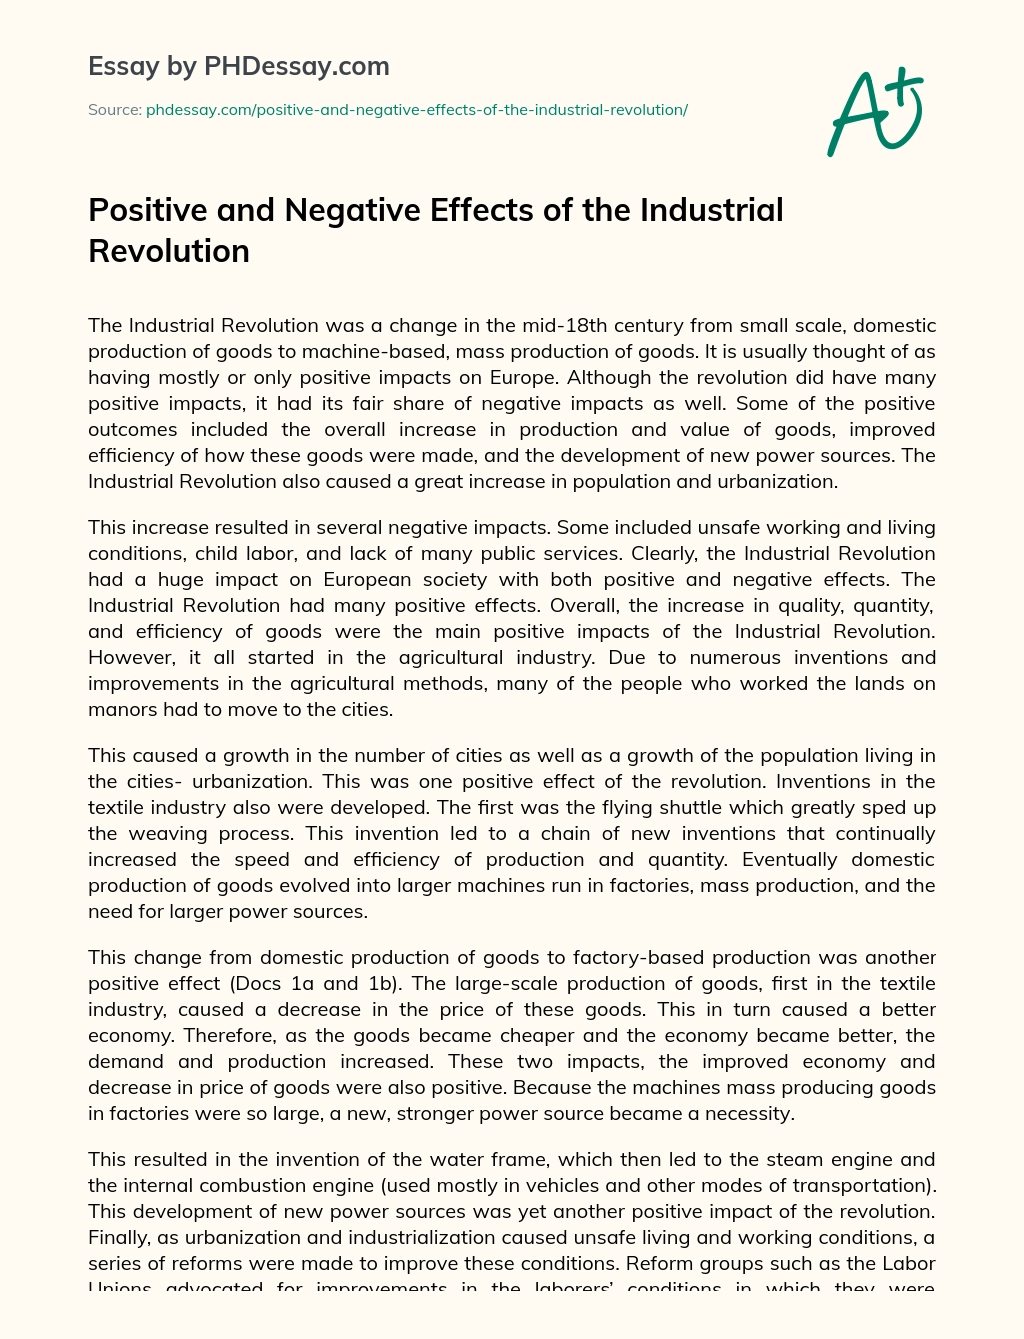 Positive and Negative Effects of the Industrial Revolution essay